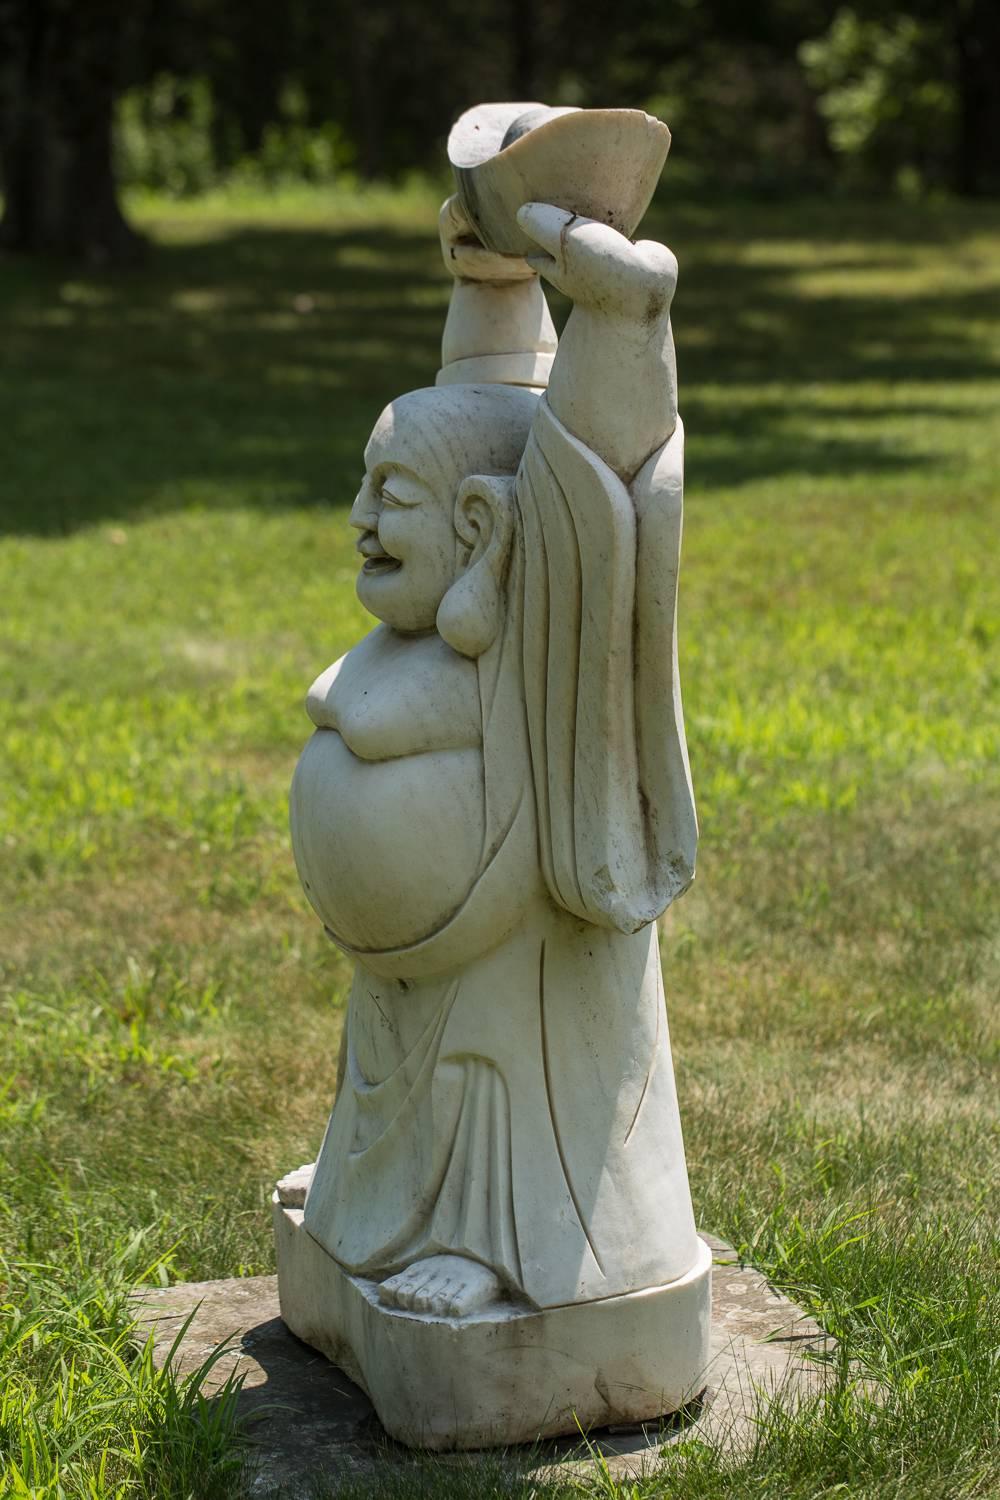 Chinese Stone Garden Sculpture of Welcoming, Happy Buddha In Excellent Condition For Sale In Hudson, NY